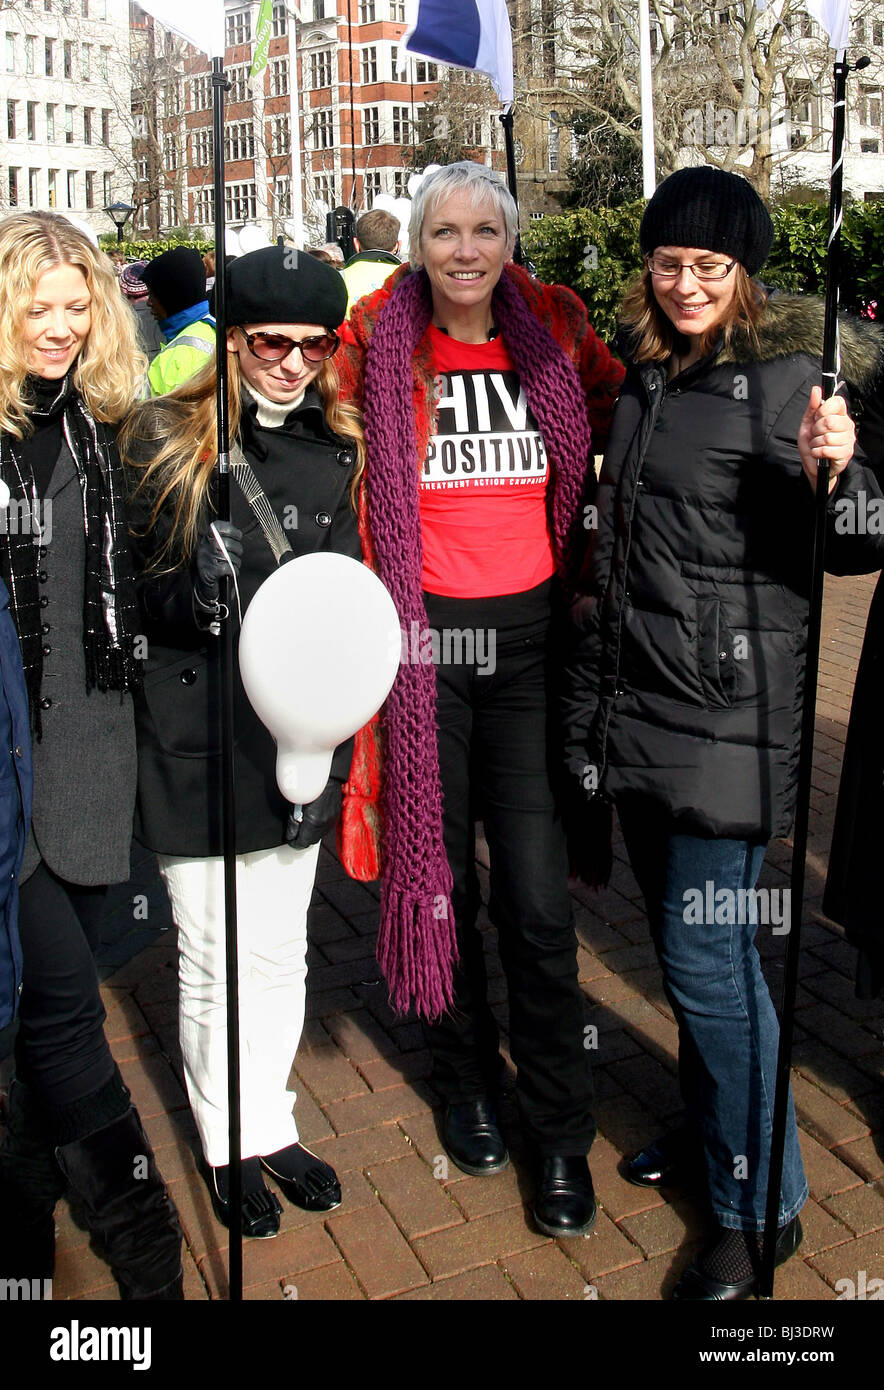 Annie Lennox (c) promotes HIV Positive in London as part of the International Women's Day celebrations Stock Photo